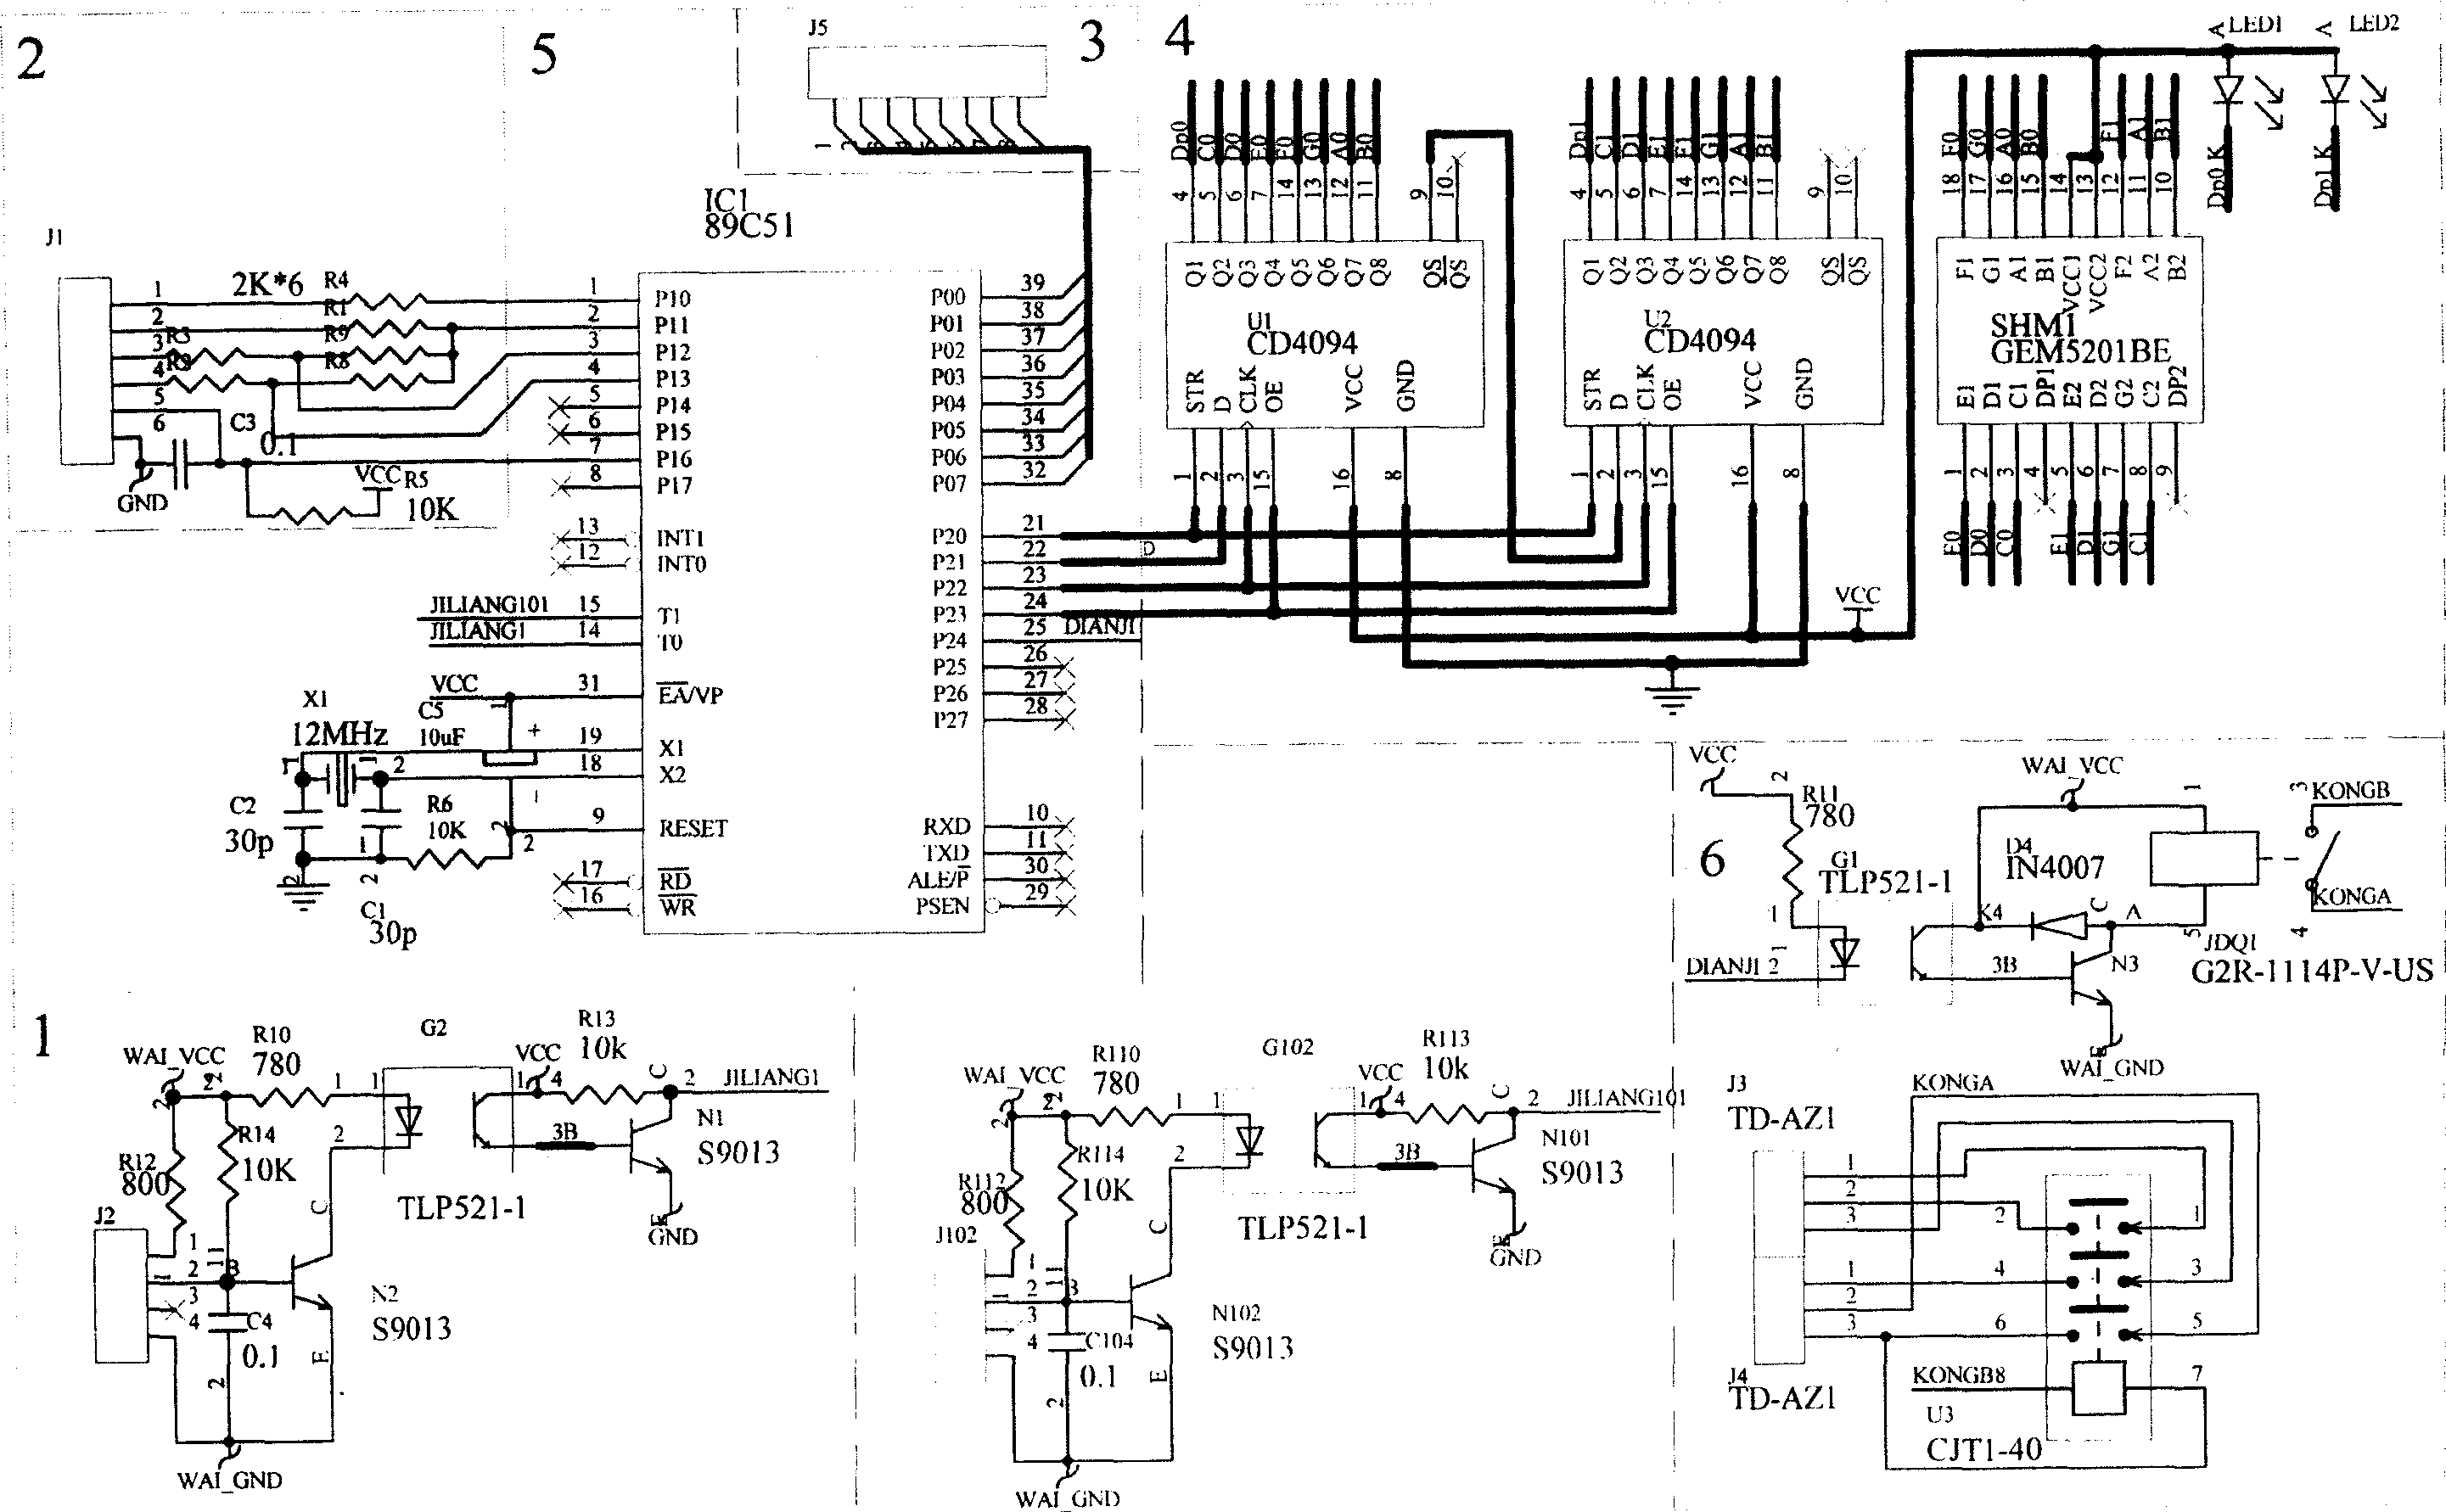 Water fetching control system for water-electric combined control prepaying IC card of motor-pumping well